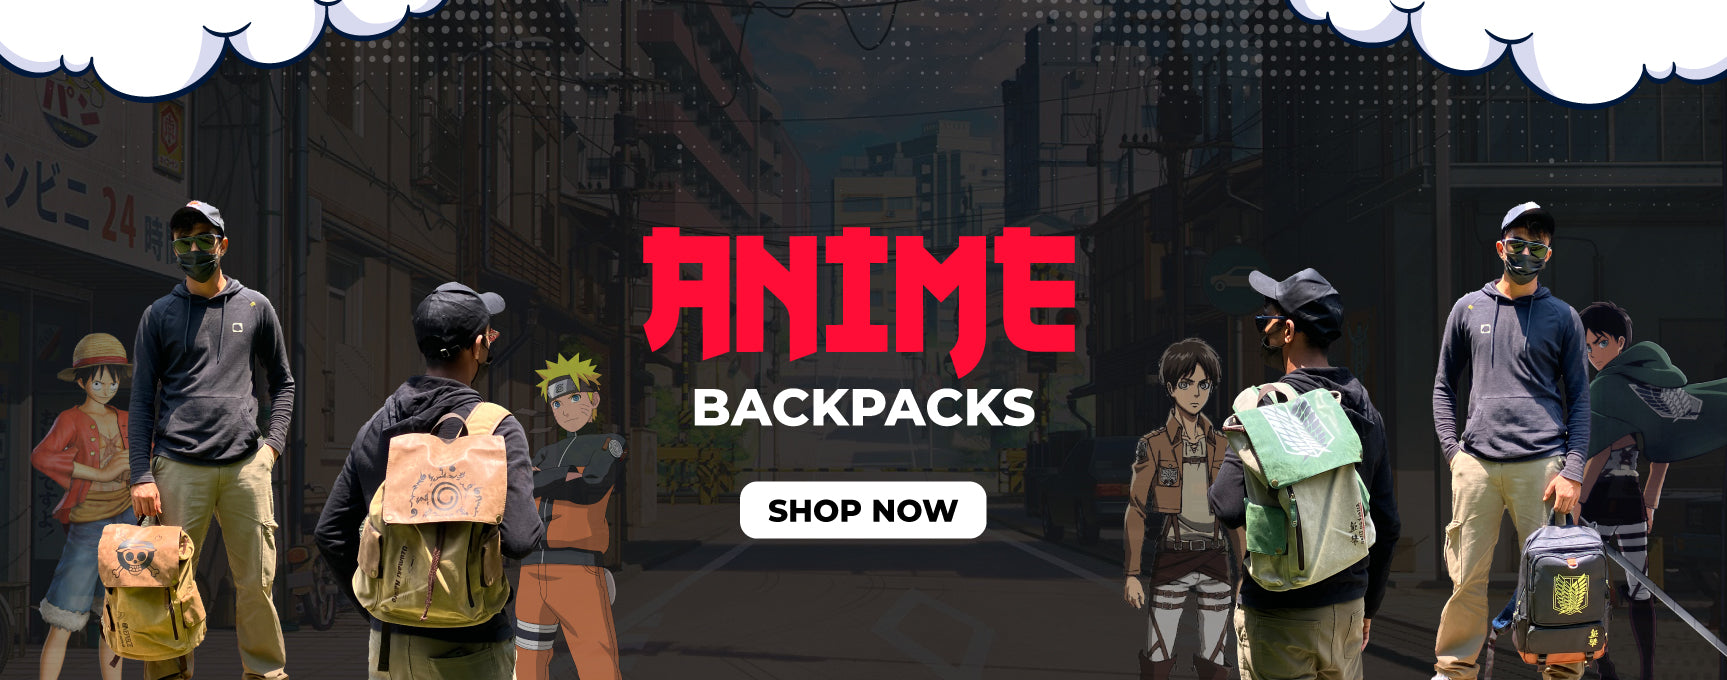 Top 9 best Anime clothing brands to shop for authentic anime merchandise   Geekymint